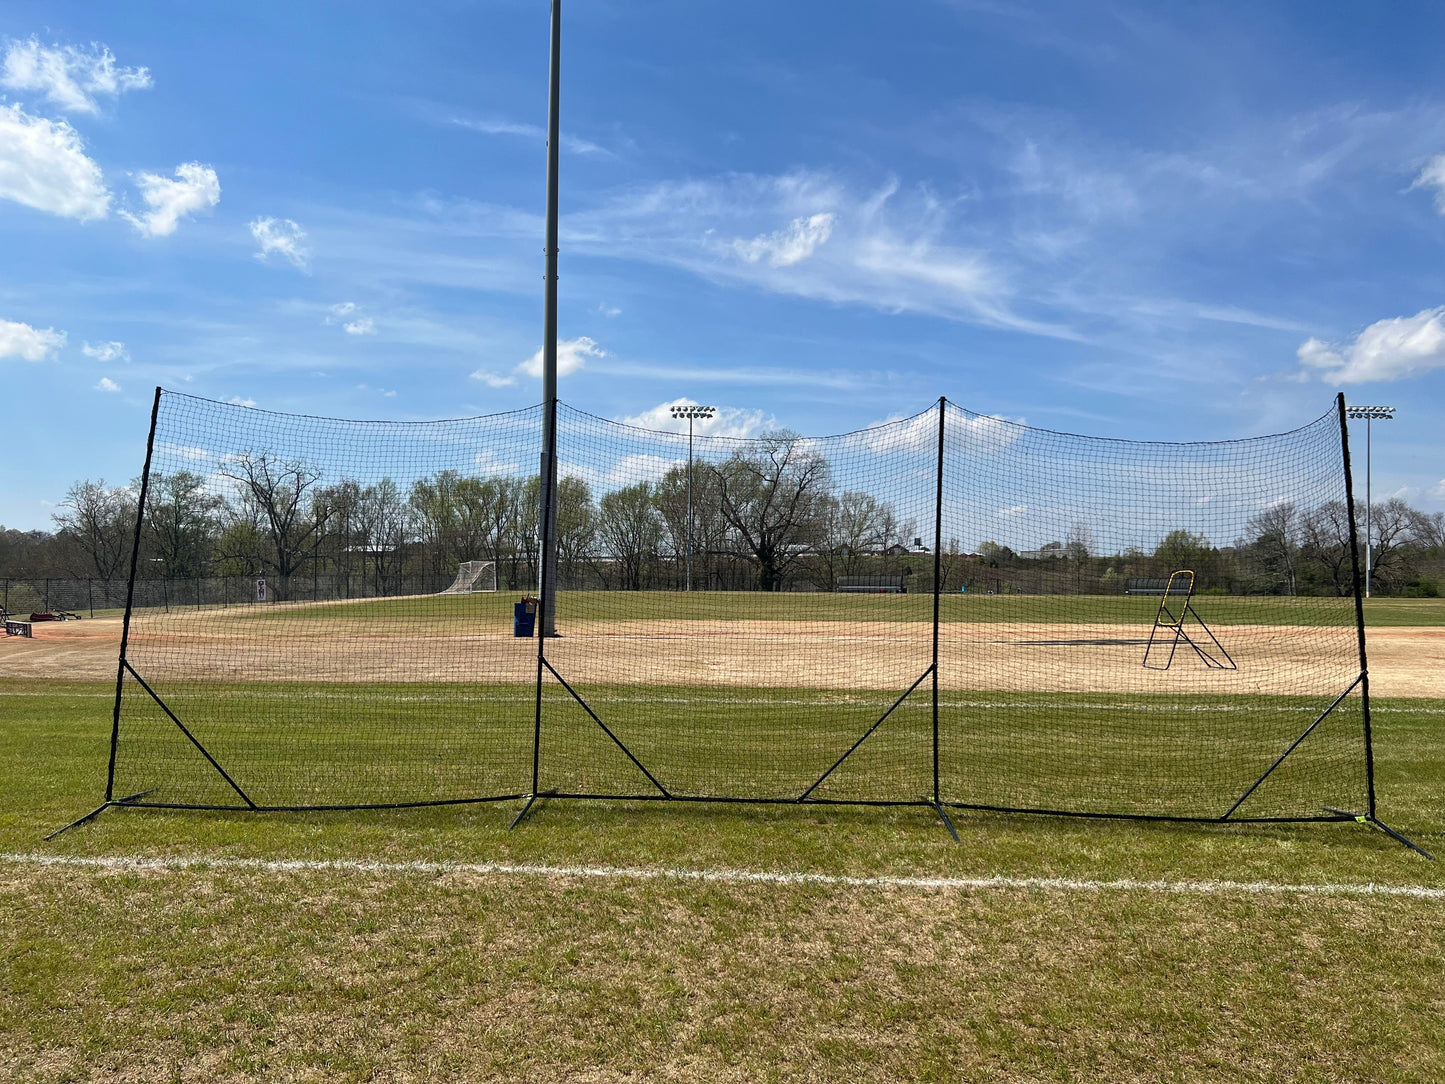 NEW! - Backstop CURV 10' x 30' Adjustable Angle System w/3mm knotted poly net by CrankShooter®   FREE SHIPPING